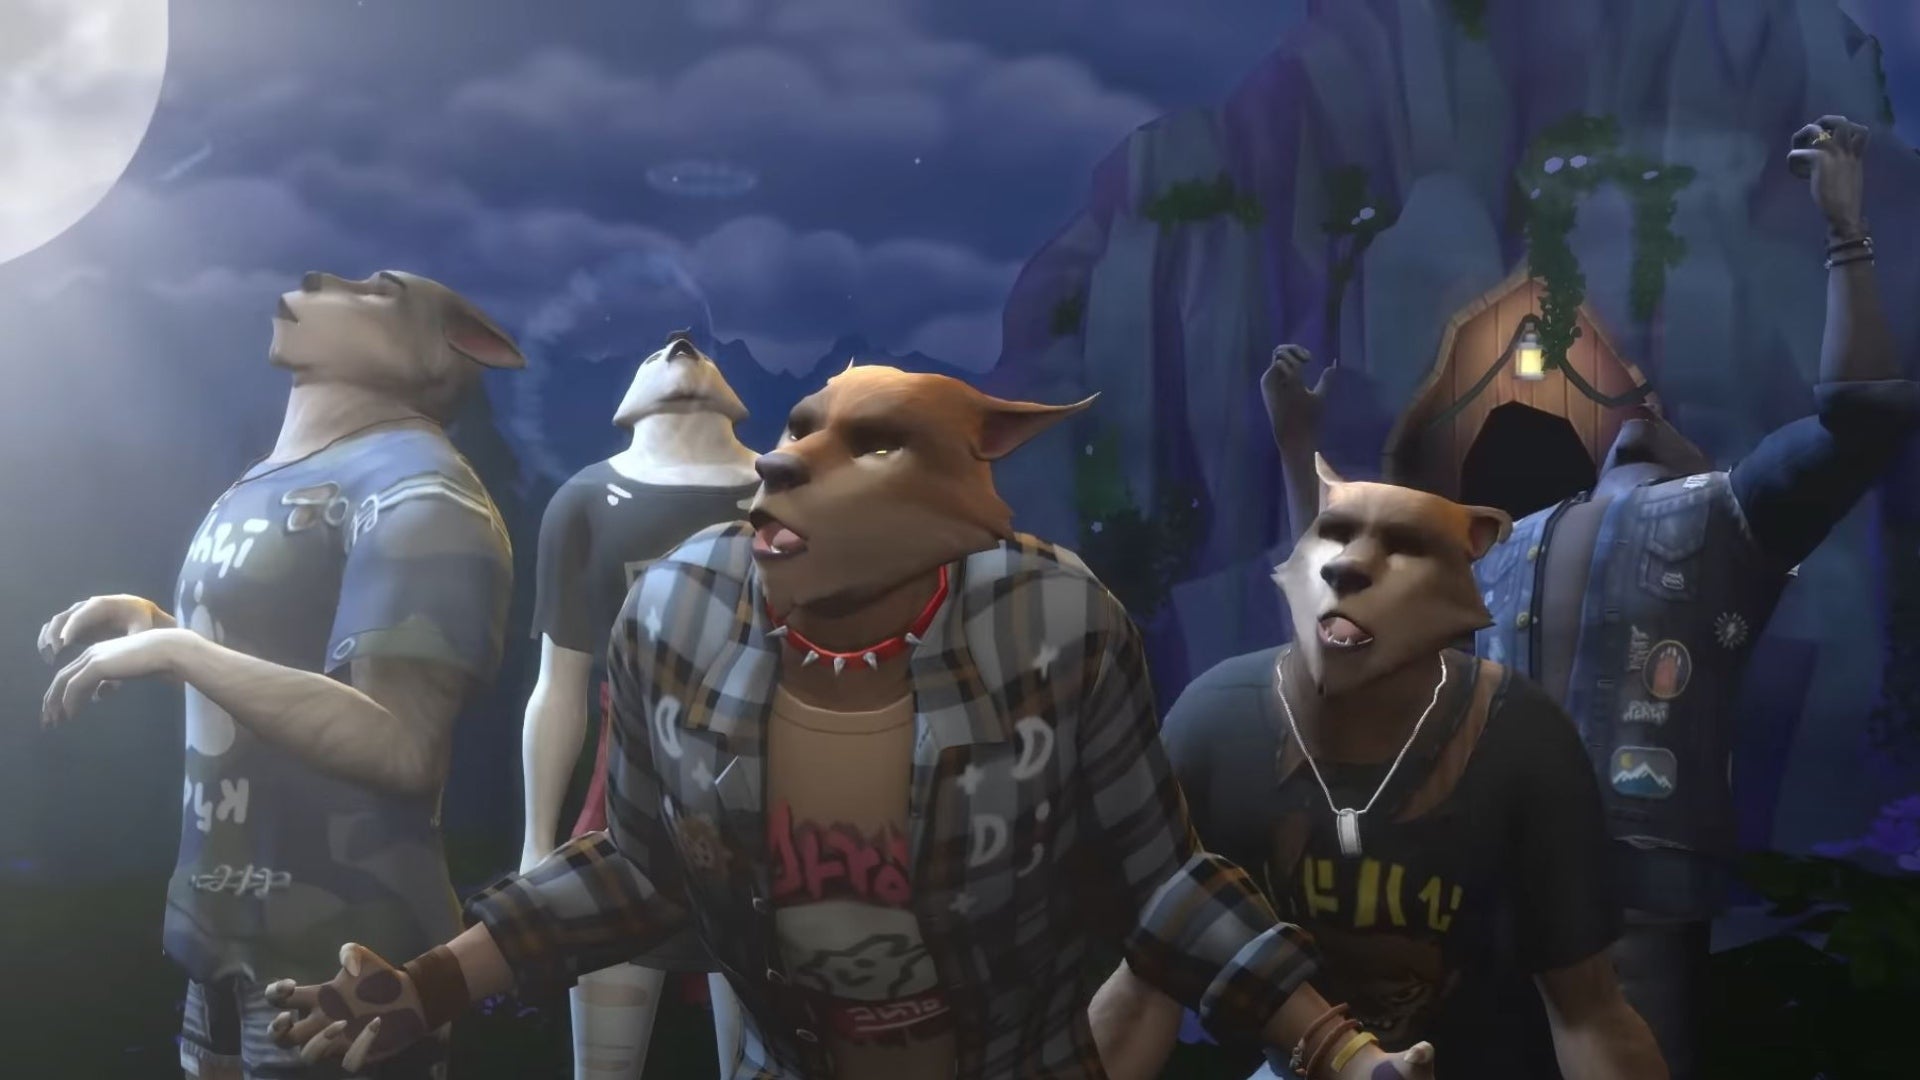 Werewolves arrive for The Sims 4 with the new expansion pack releasing June 16th.